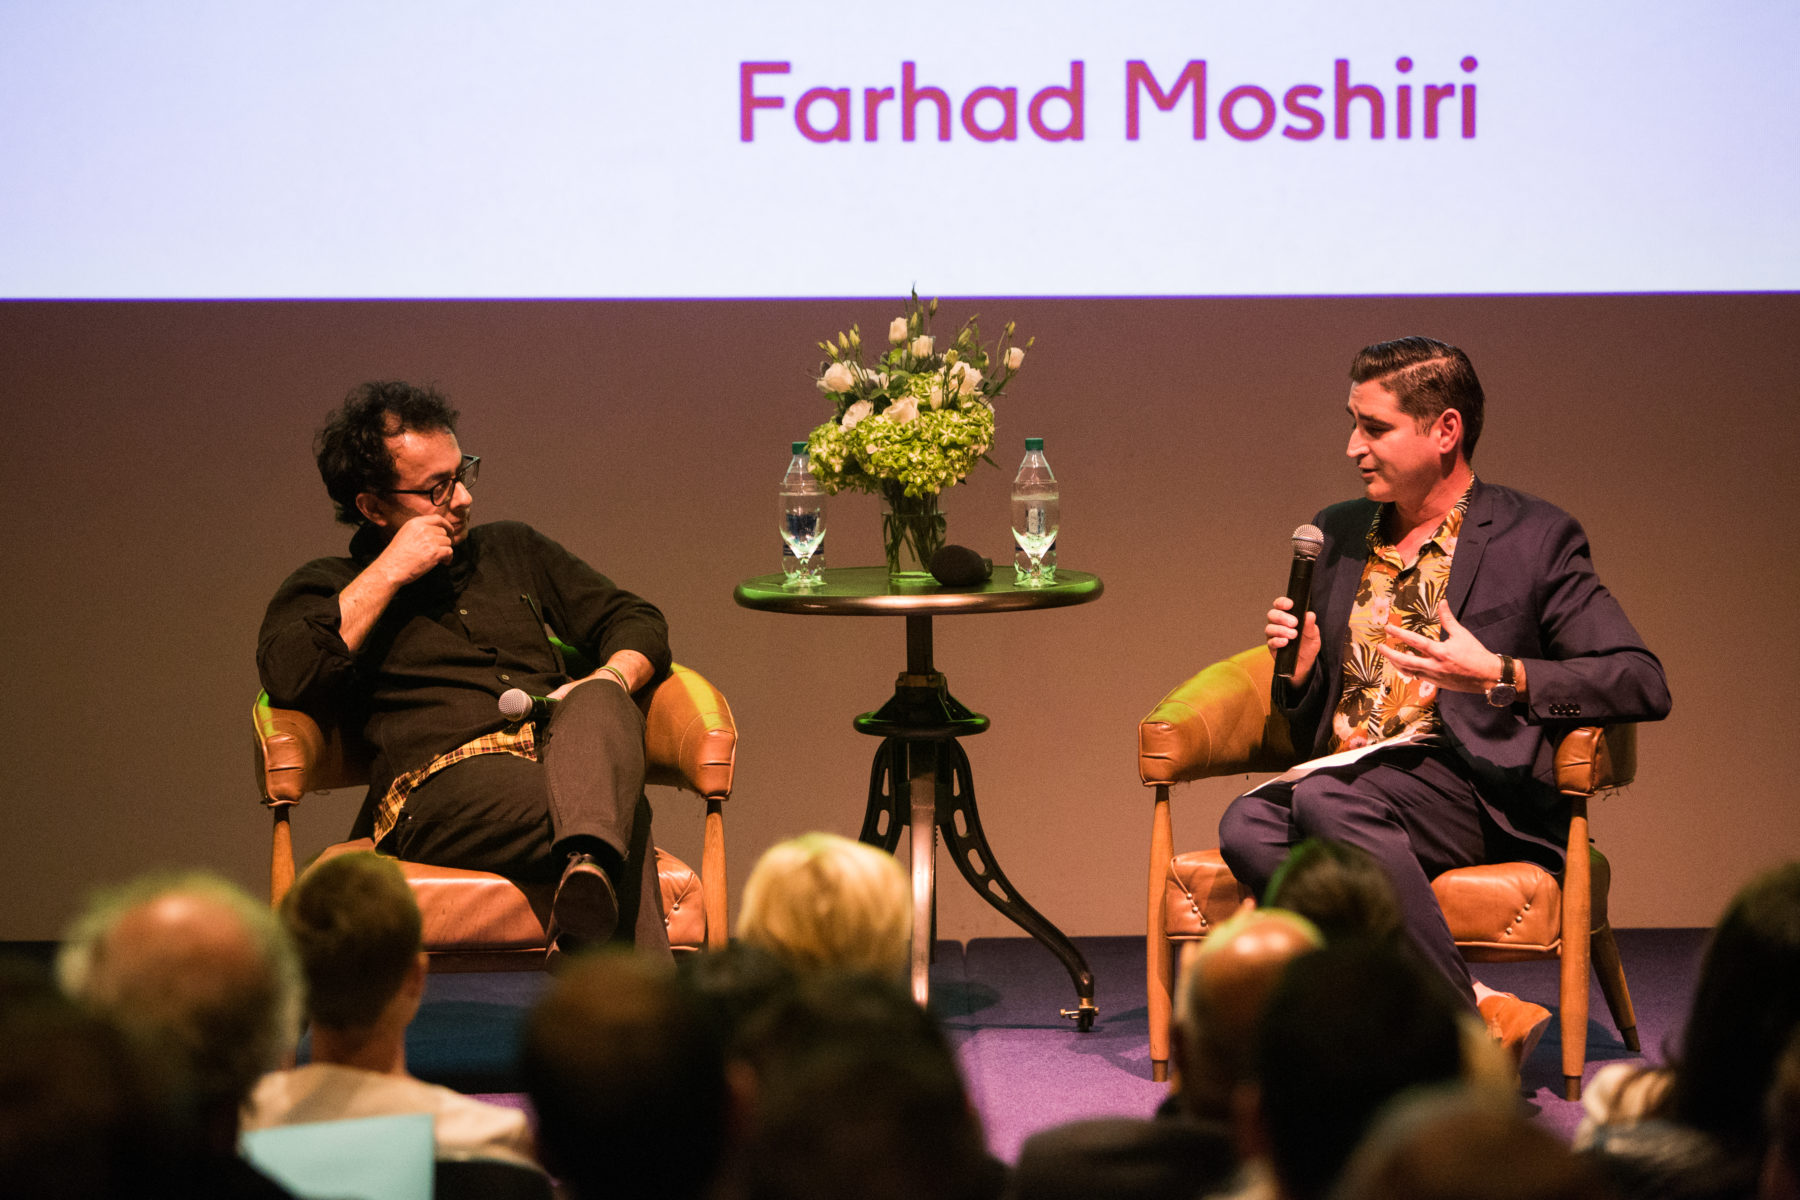 Two men sit on chairs on a stage, engaged in conversation. The screen behind them says Farhad Moshiri.